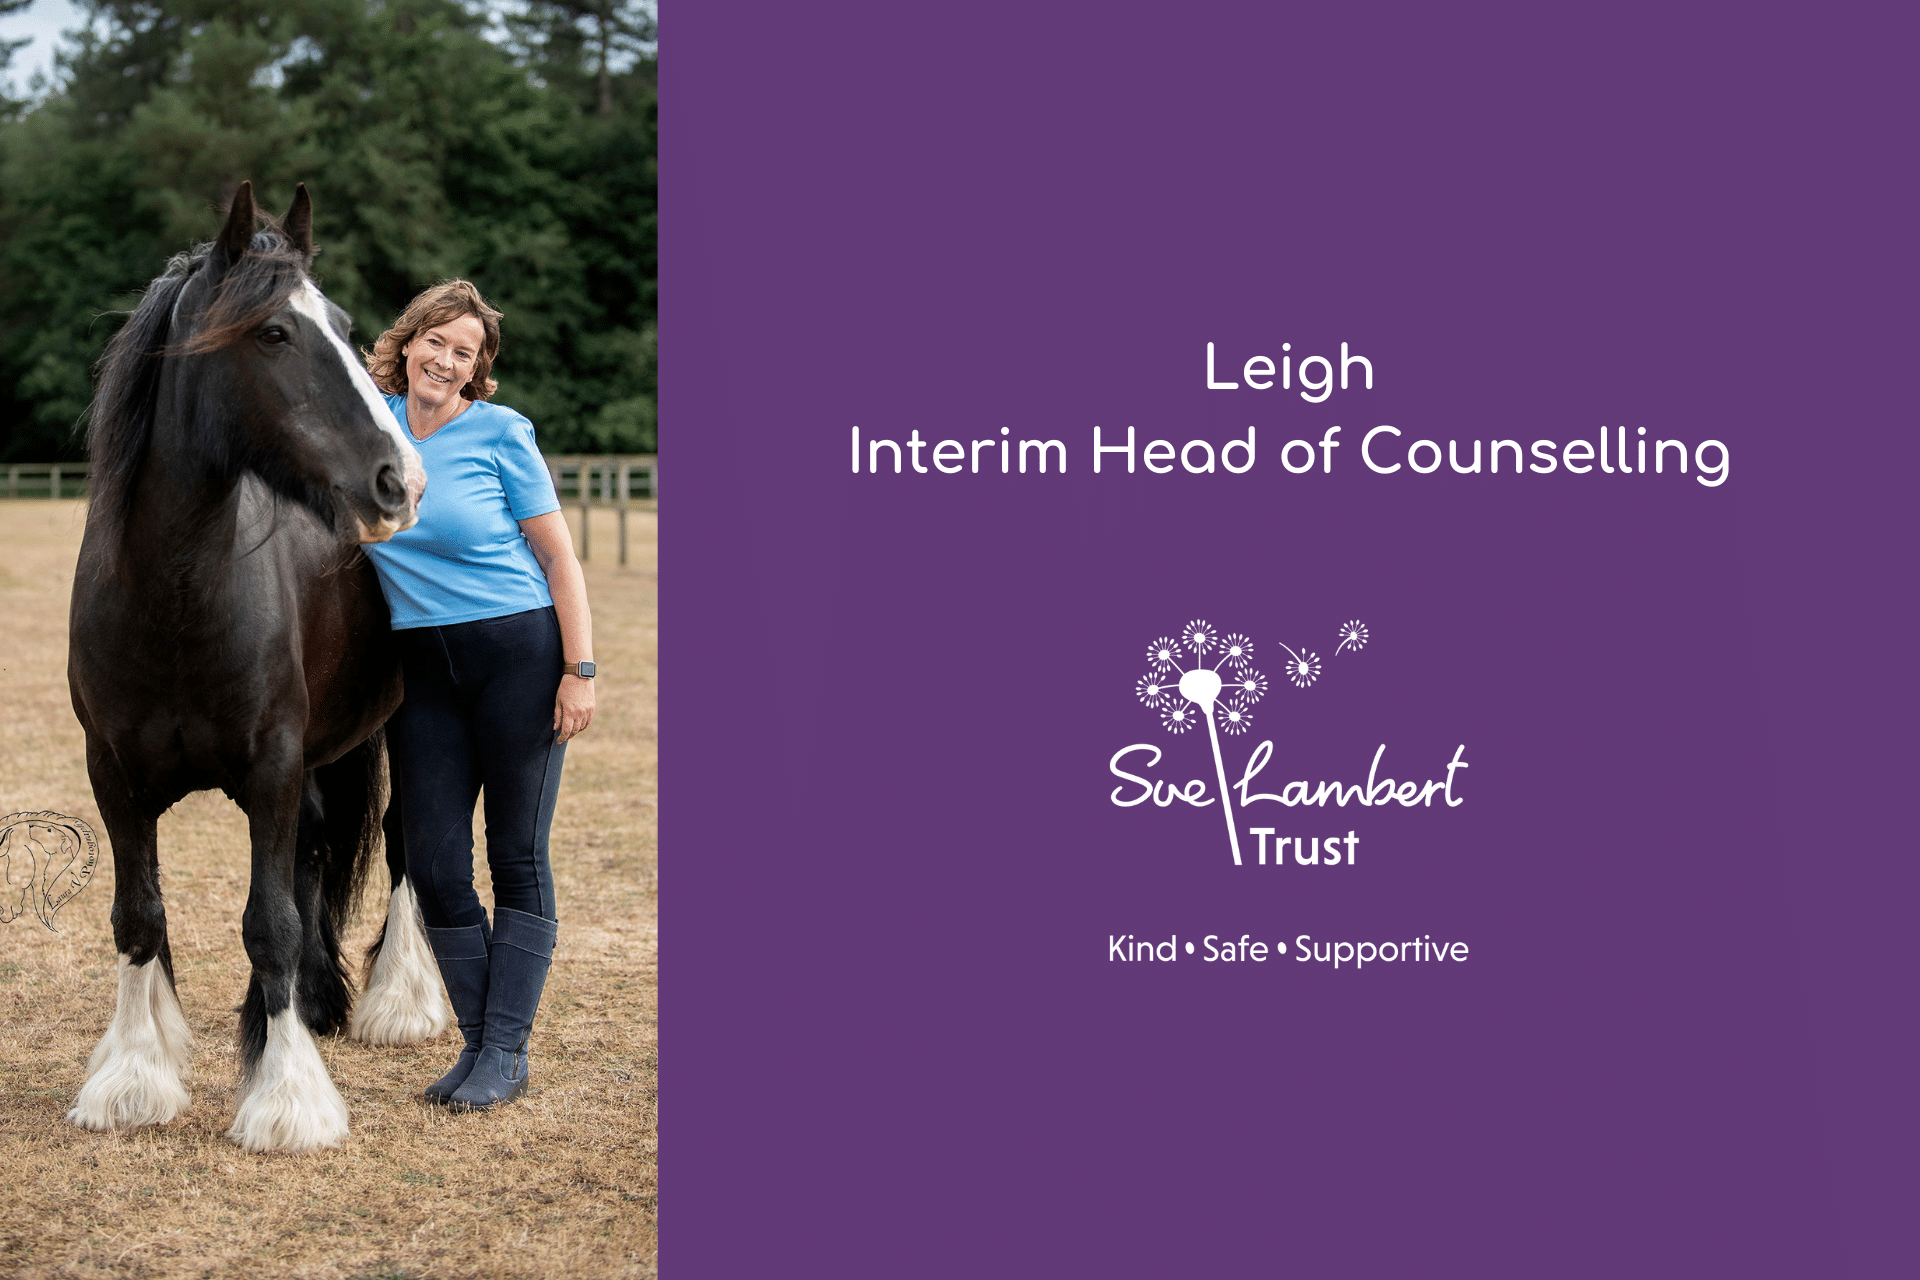 Leigh Interim Head of Counselling